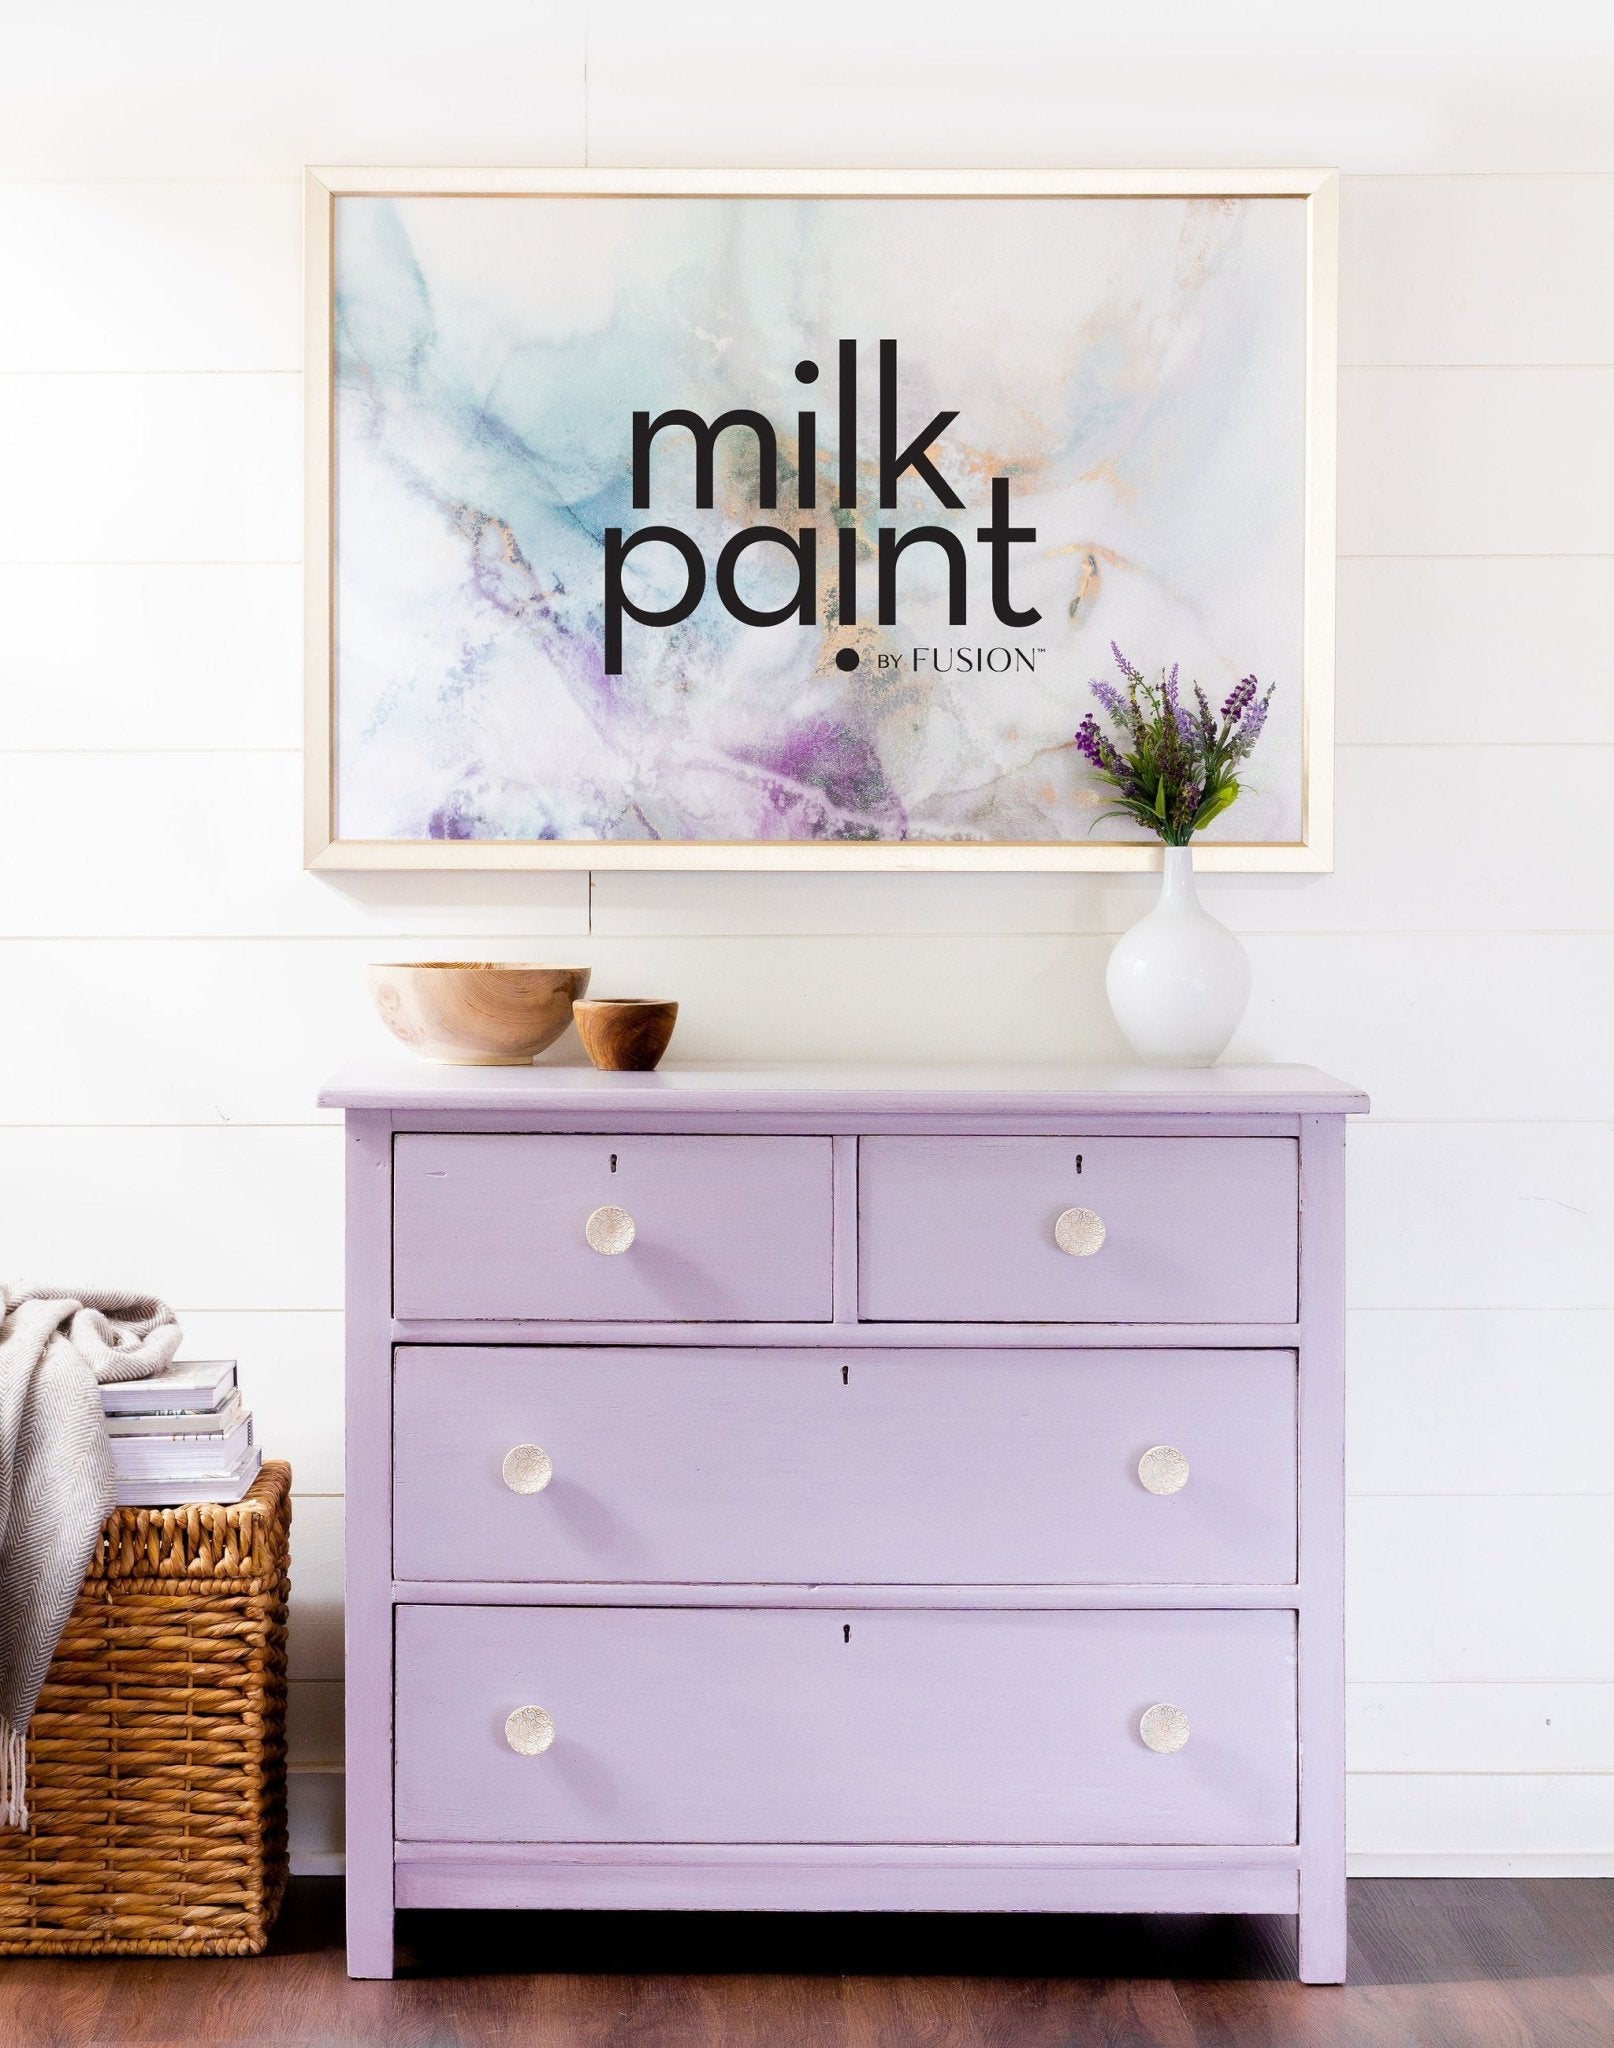 Milk Paint by Fusion - Wisteria Row - Rustic River Home